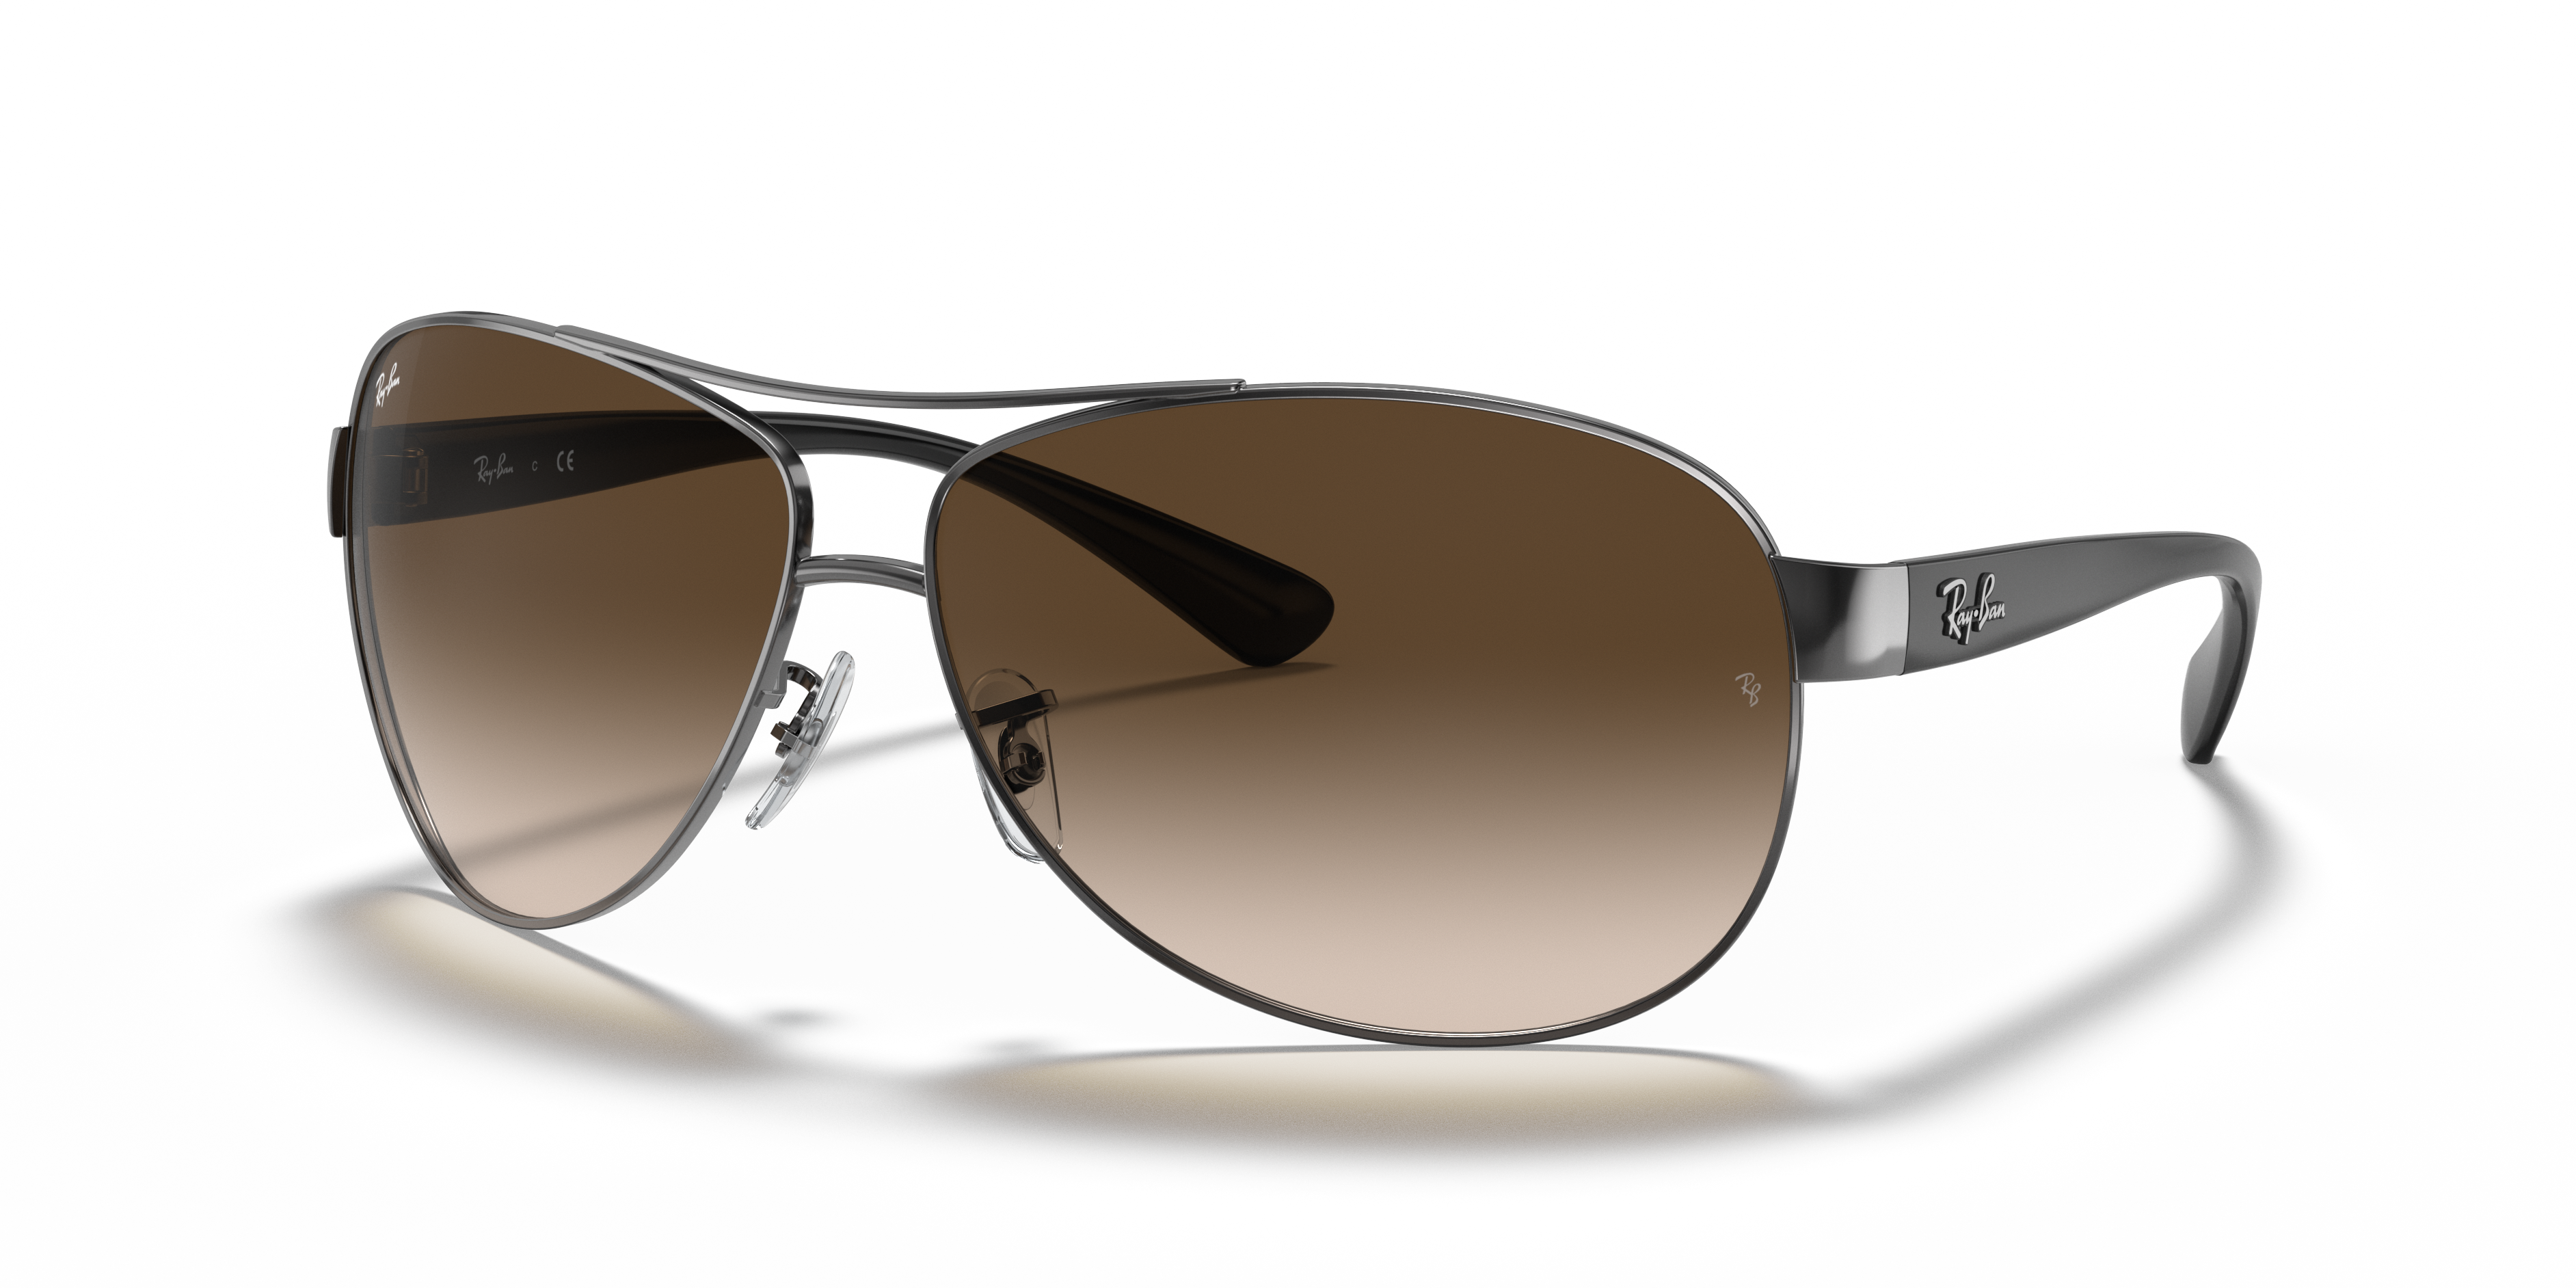 RB3386 Sunglasses in Gunmetal and Brown - RB3386 | Ray-Ban® US